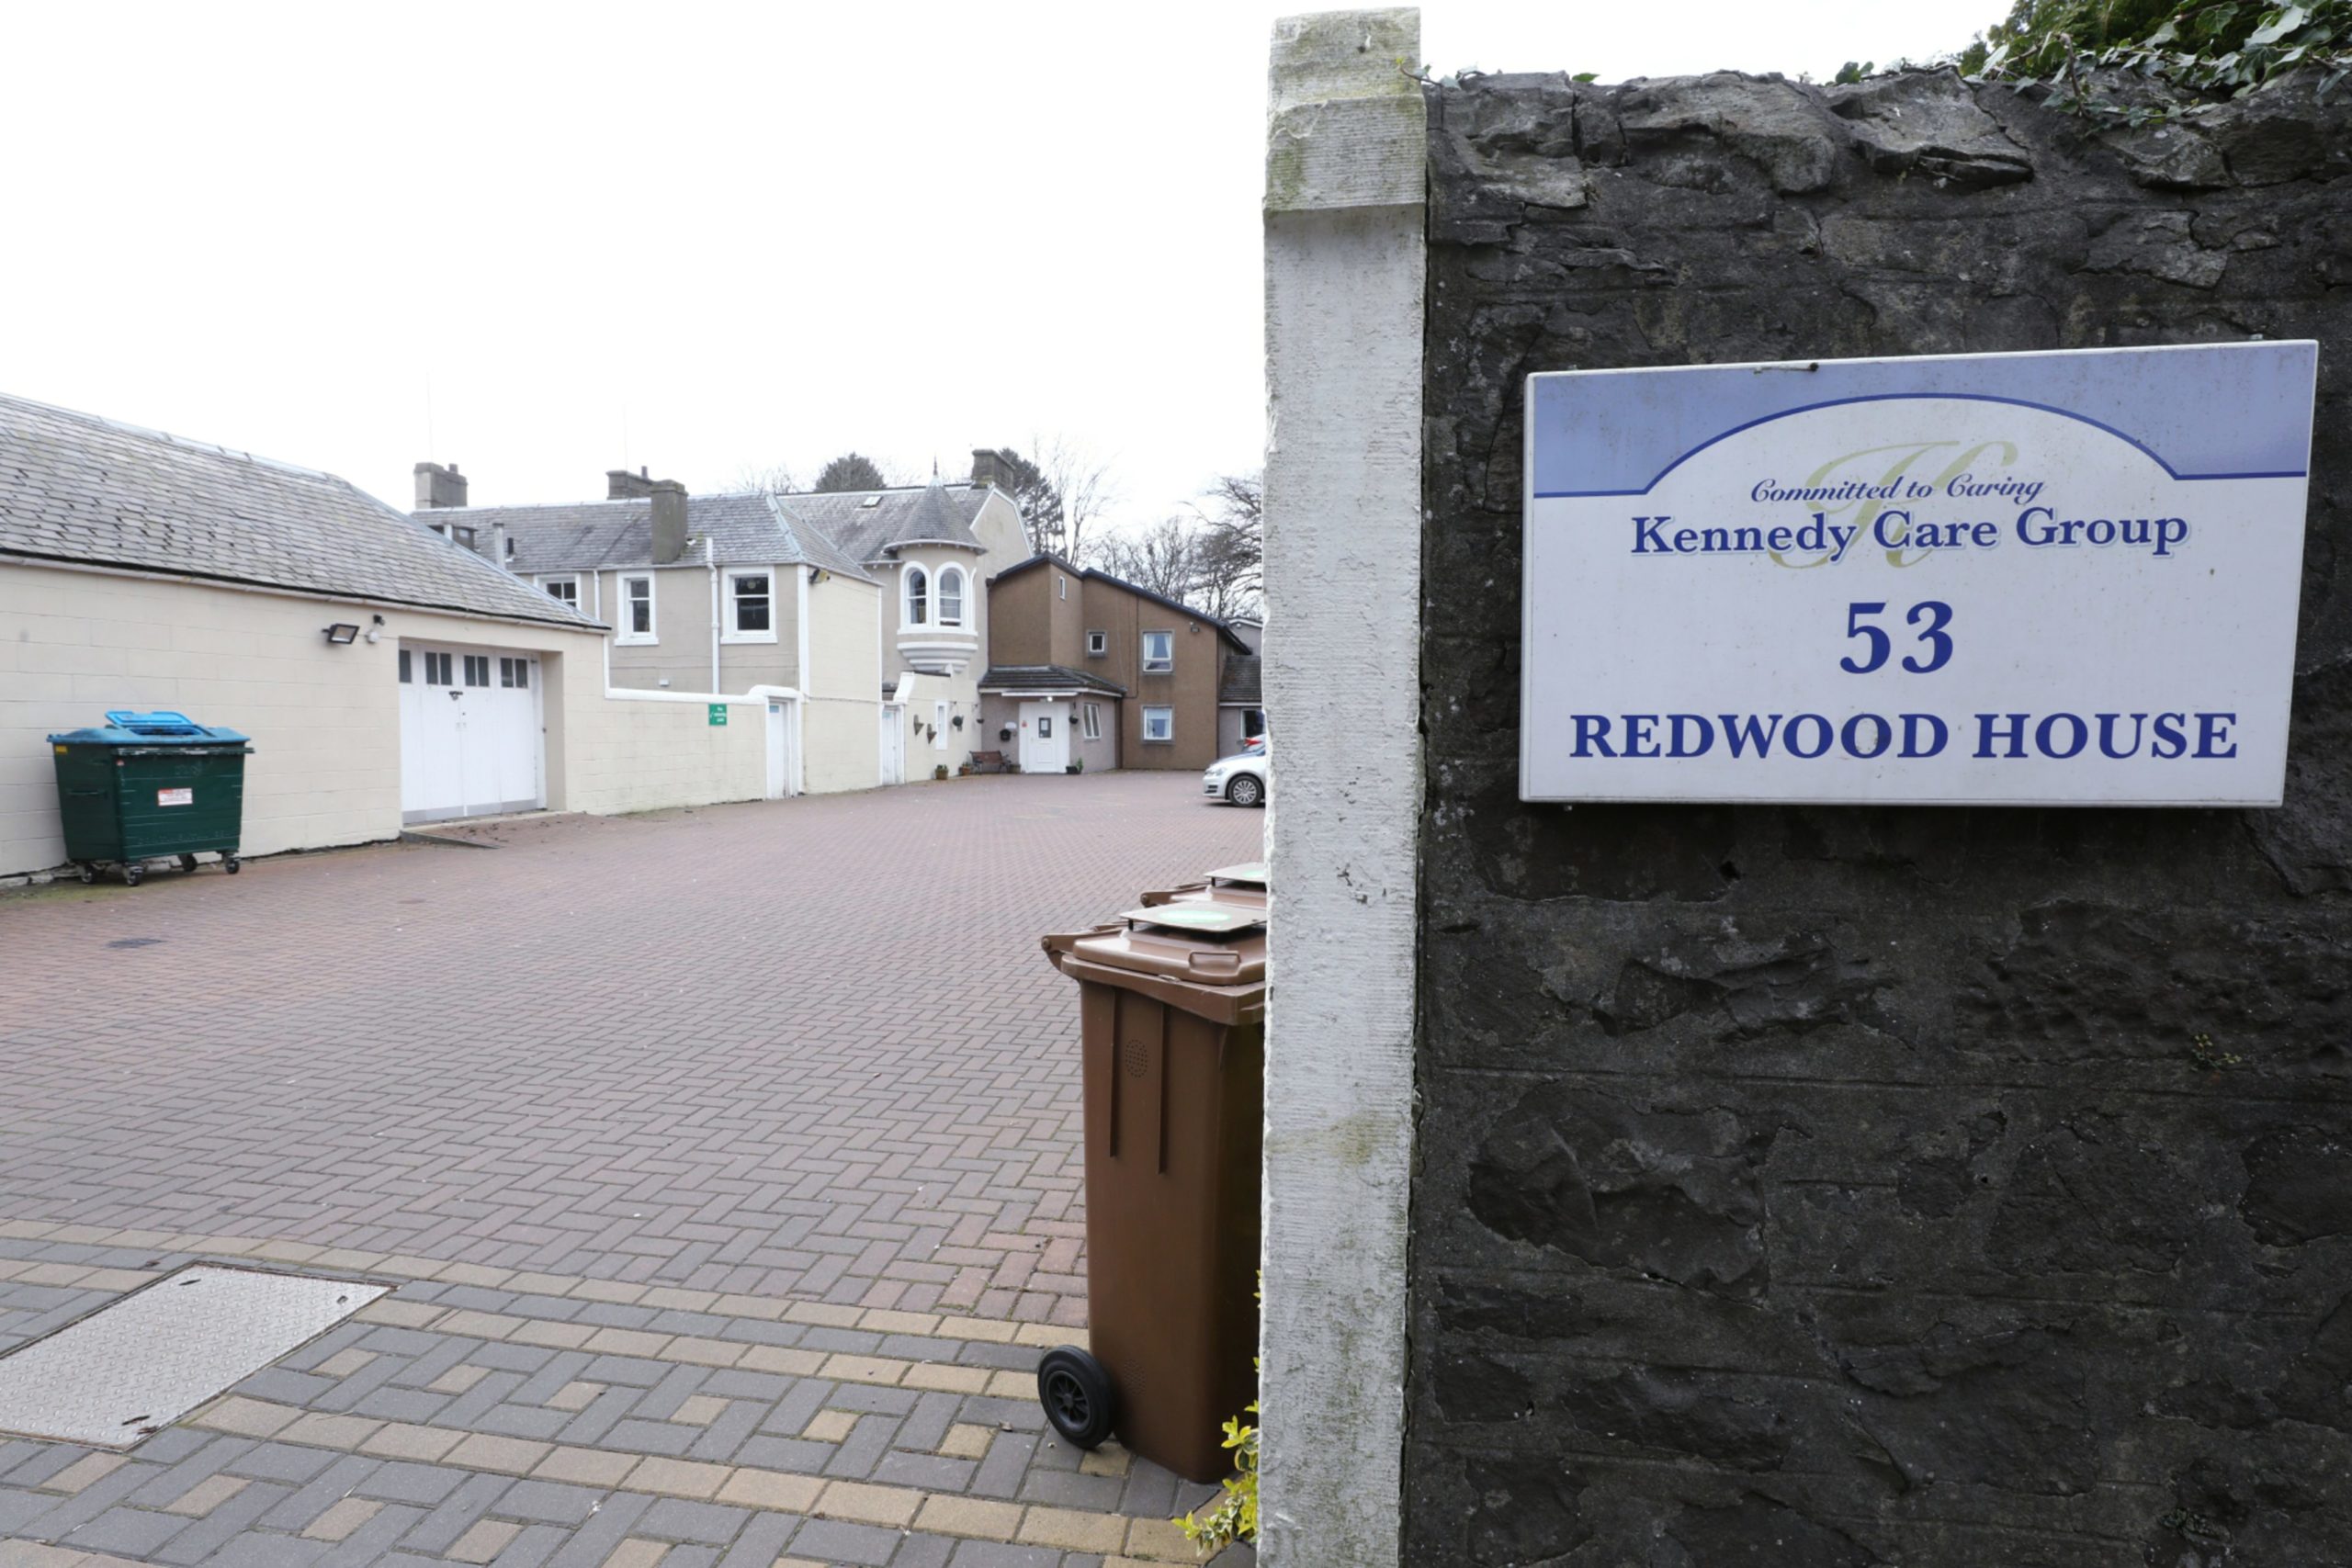 Redwood House care home in Broughty Ferry.